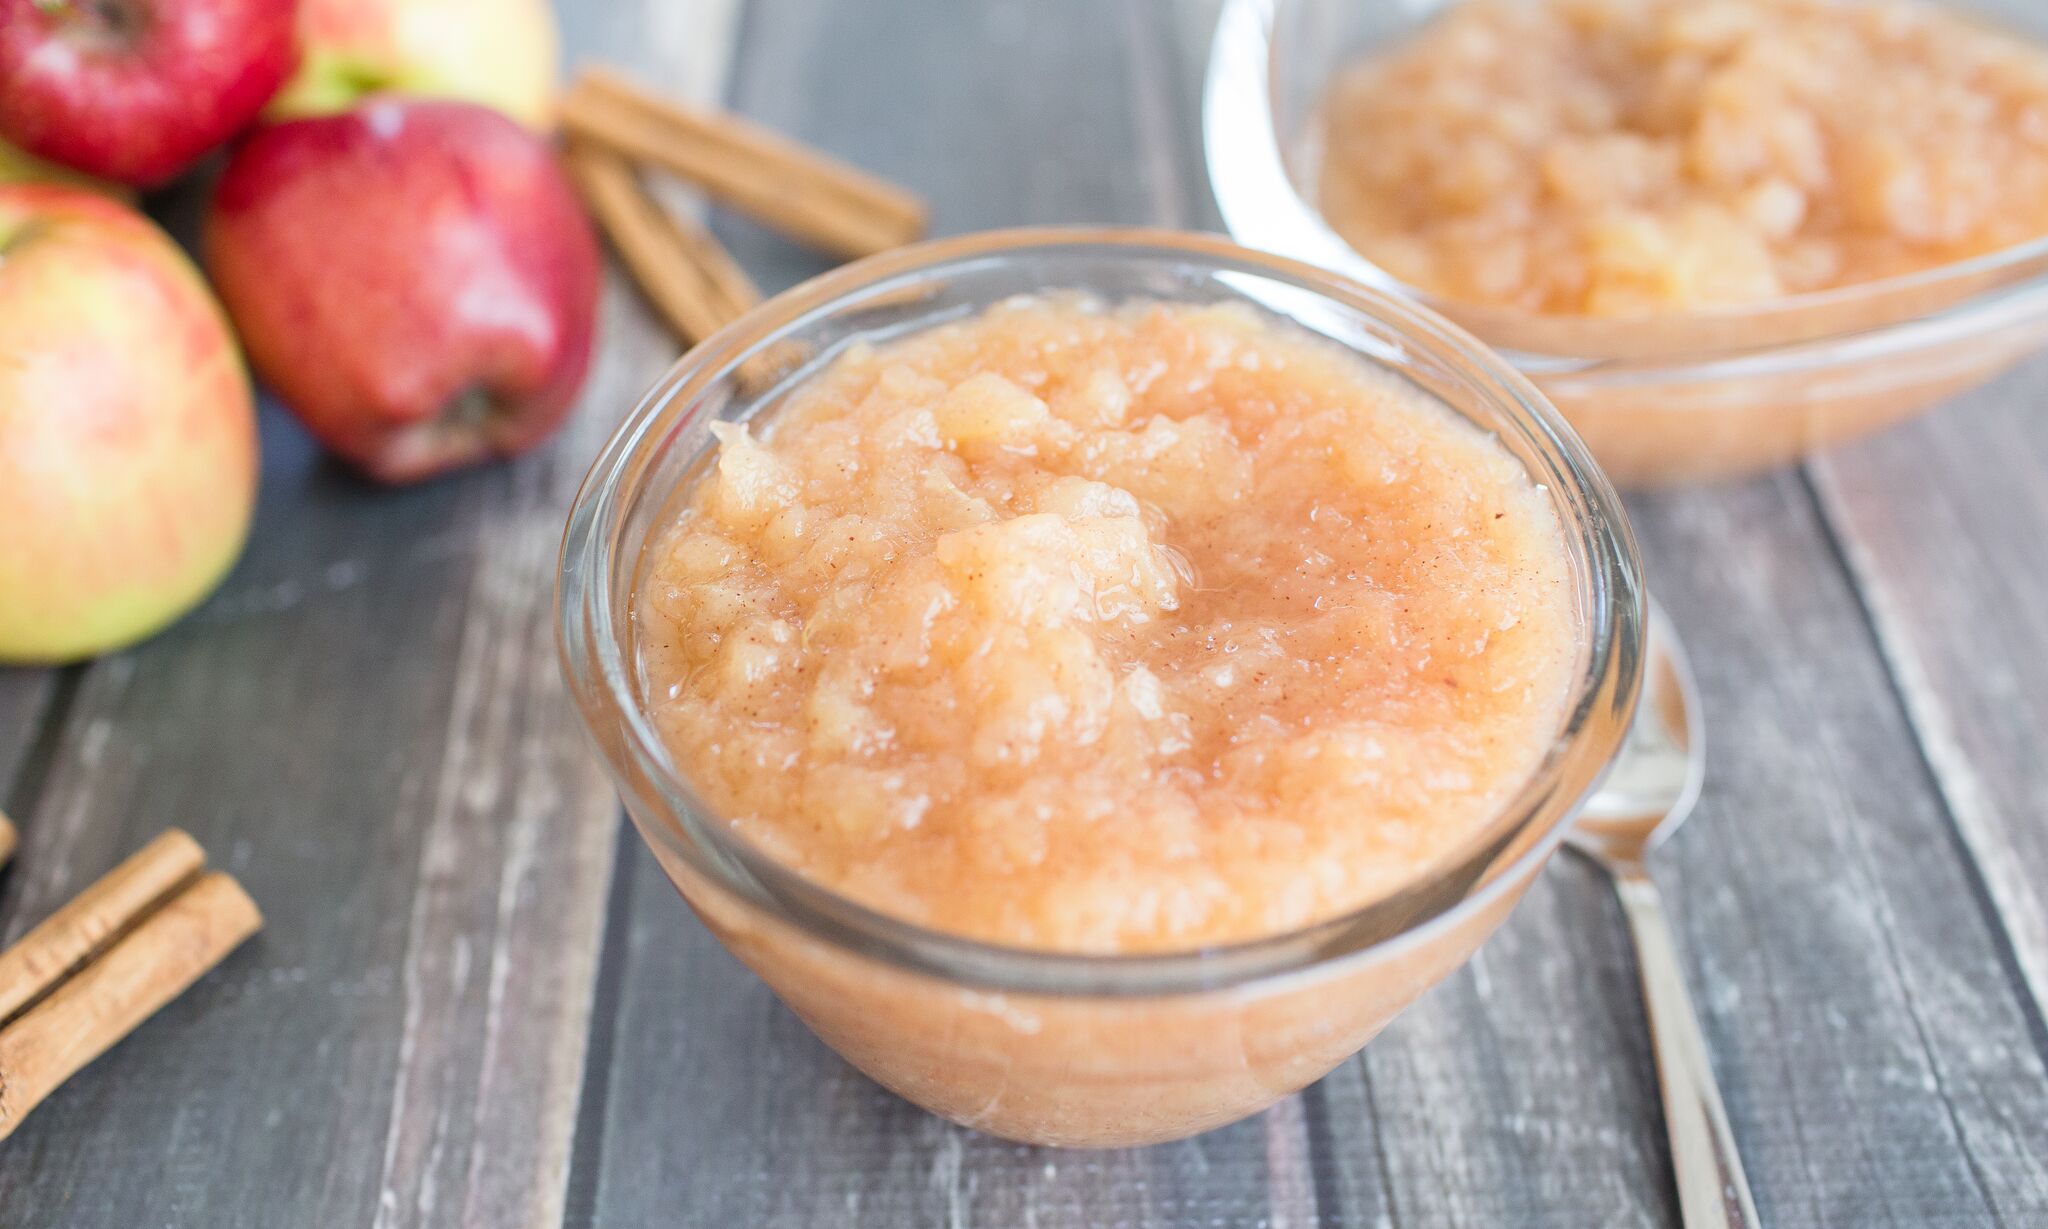 Serve finished apple sauce in a bowl and enjoy. 